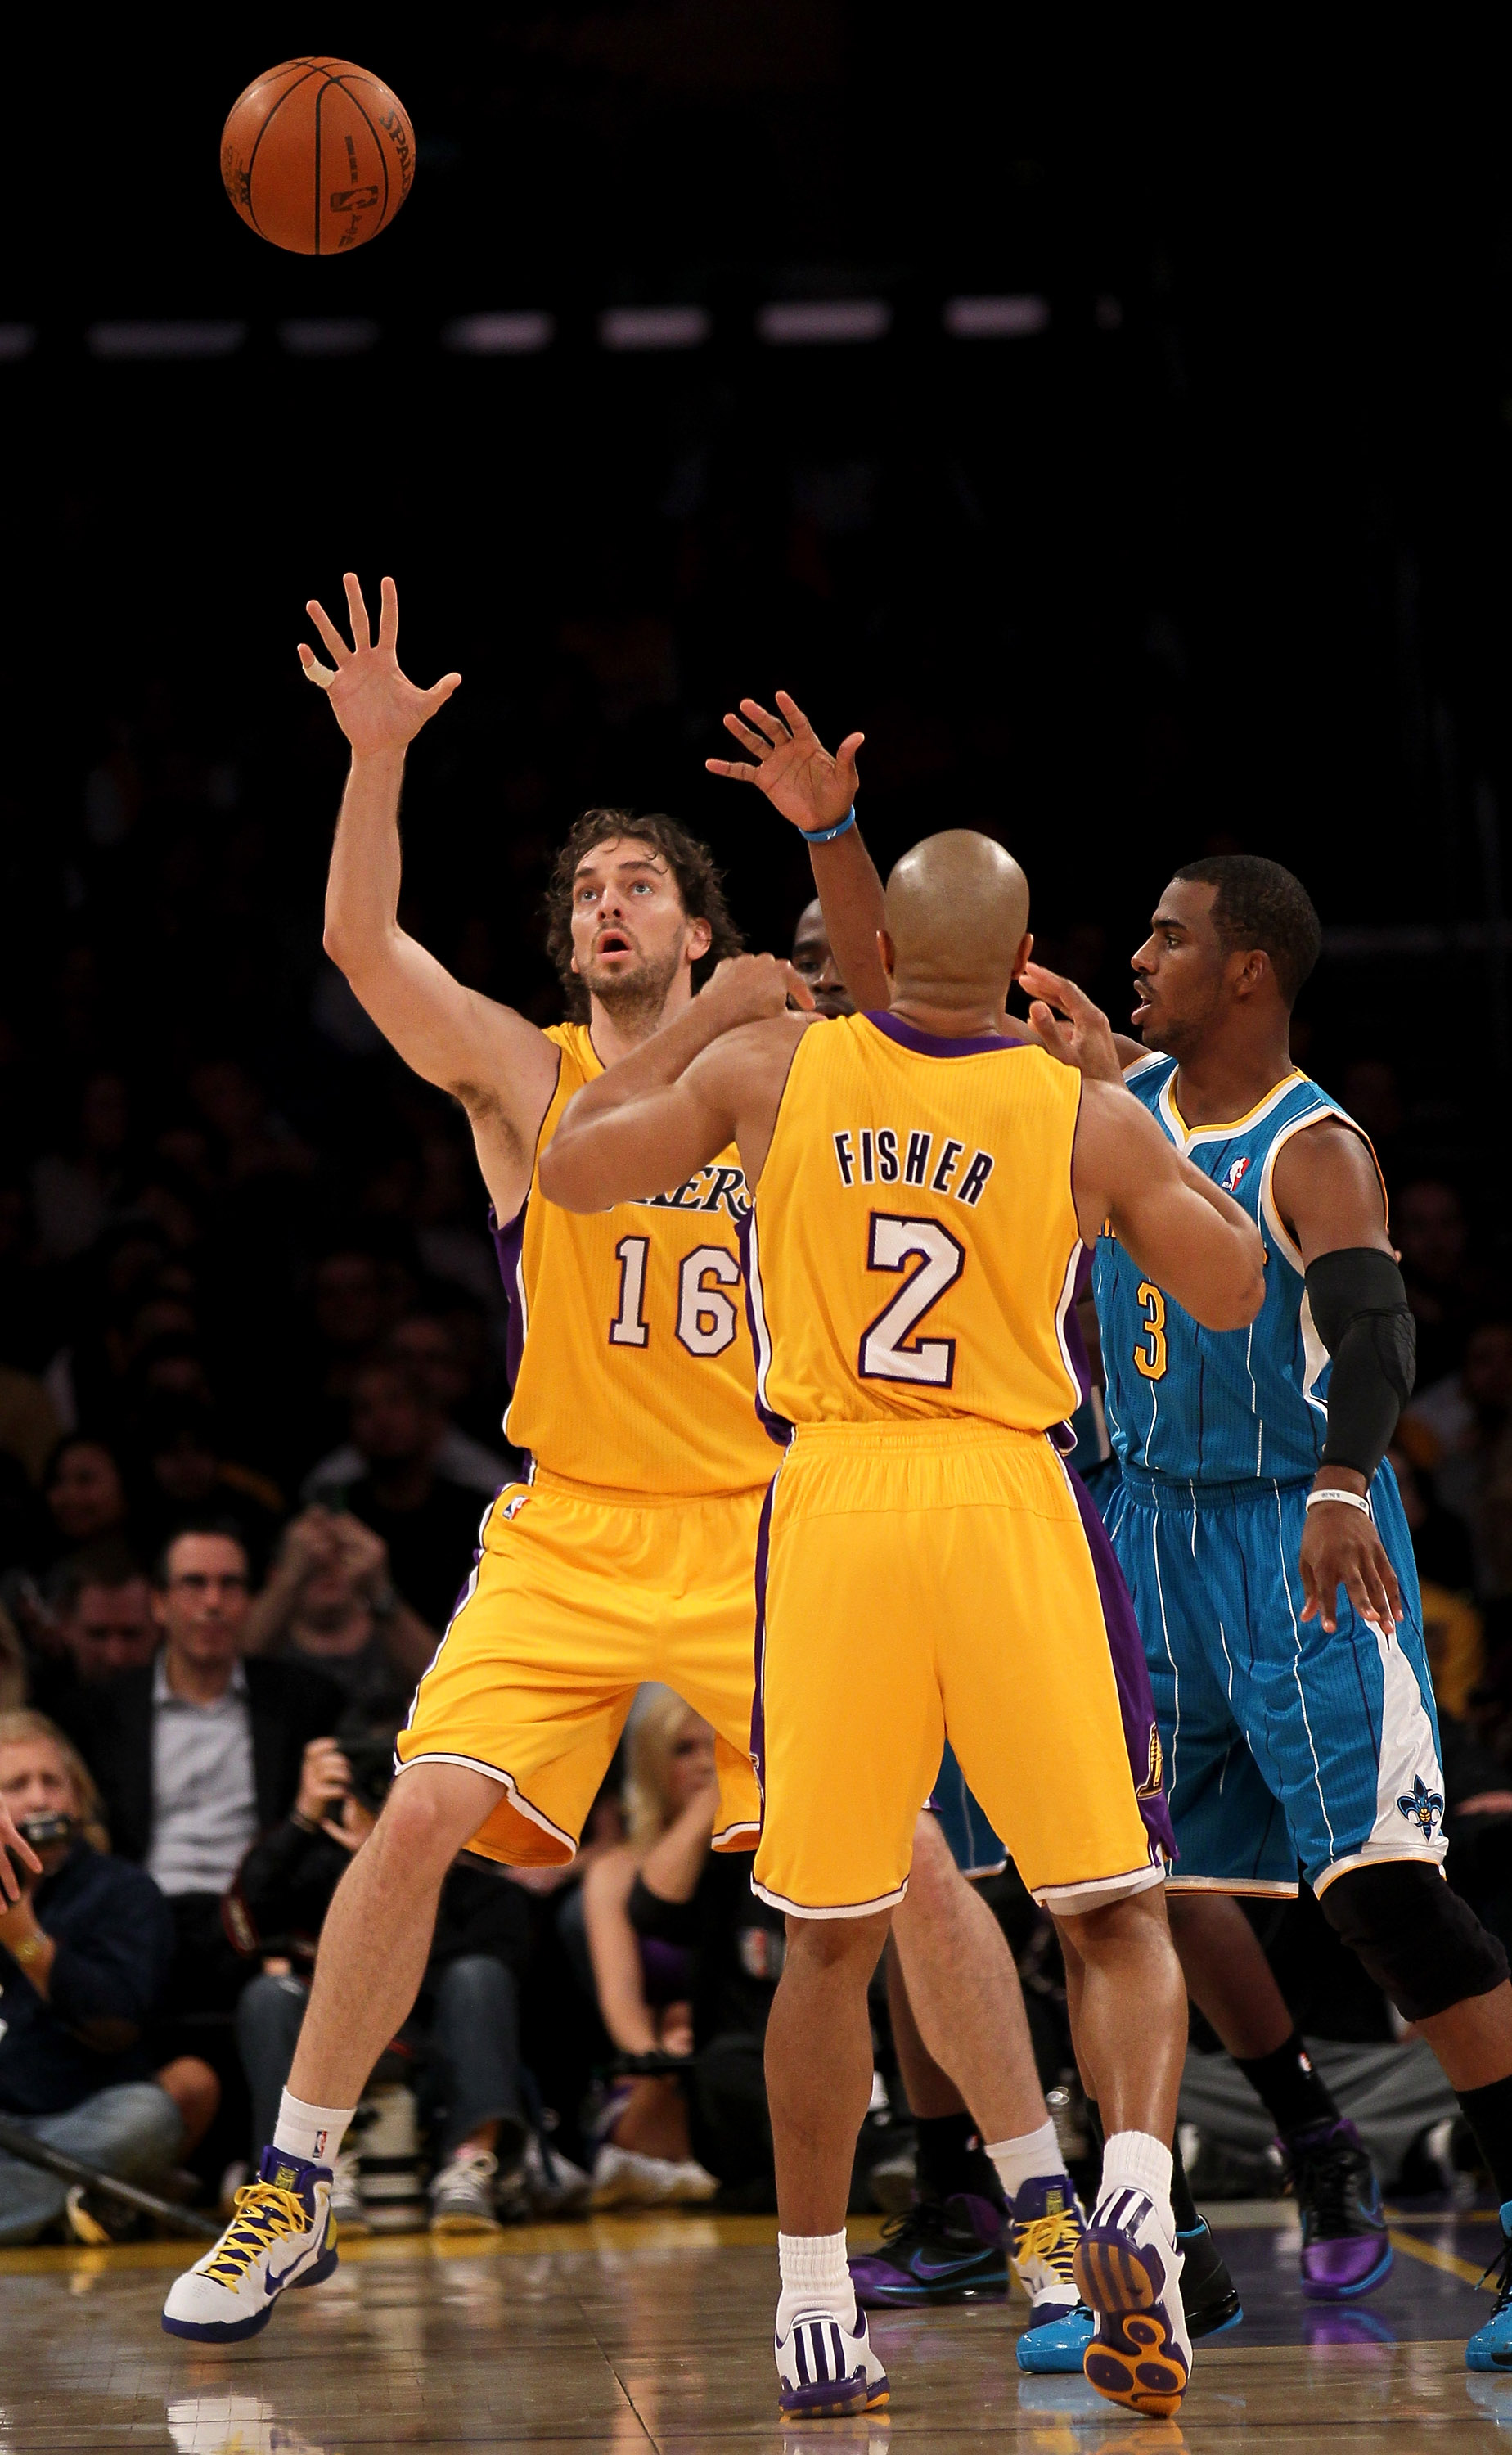 LOS ANGELES, CA - JANUARY 07:  Pau Gasol #16 of the Los Angeles Lakers reaches for a pass from Derek Fisher #16 as Chris Paul #3 of the New Orleans Hornets defends at Staples Center on January 7, 2011 in Los Angeles, California.  The Lakers won 101-97.  N